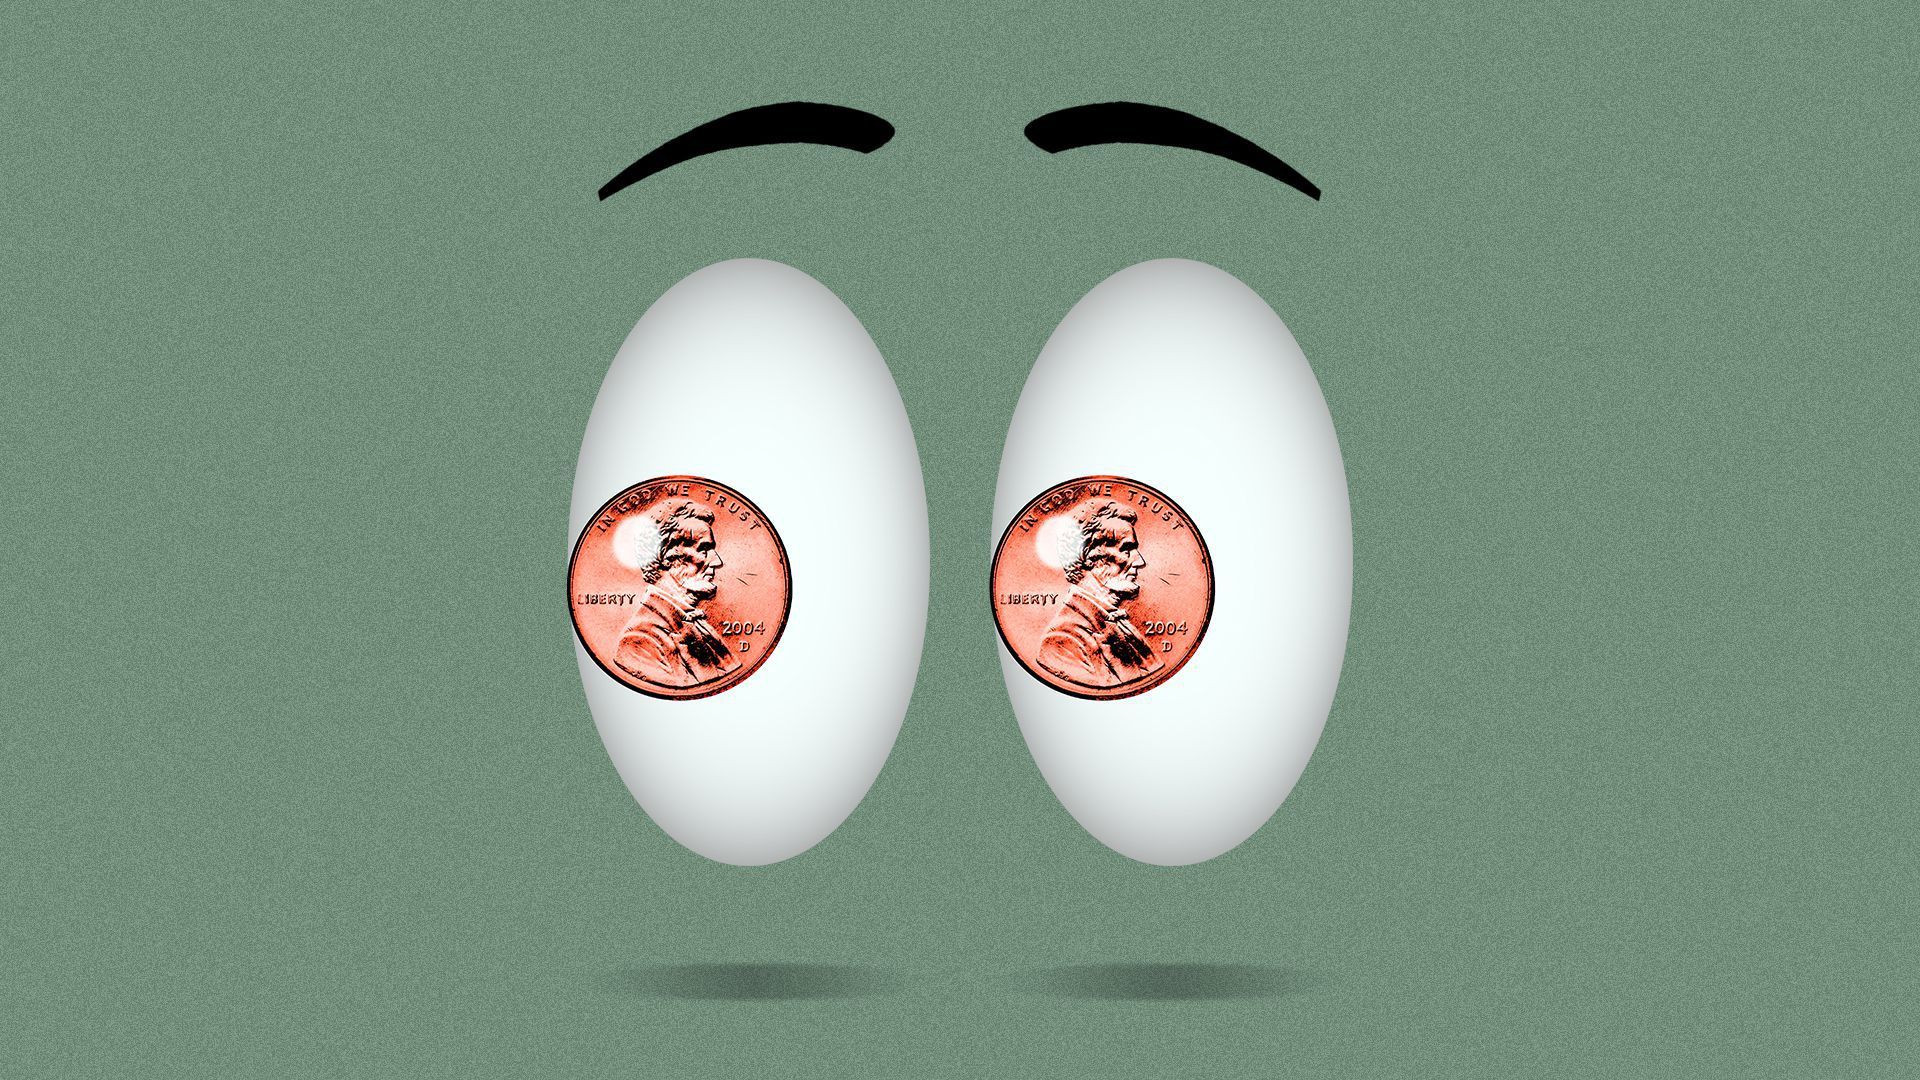 Illustration of a pair of eyes with pennies as the iris/pupil